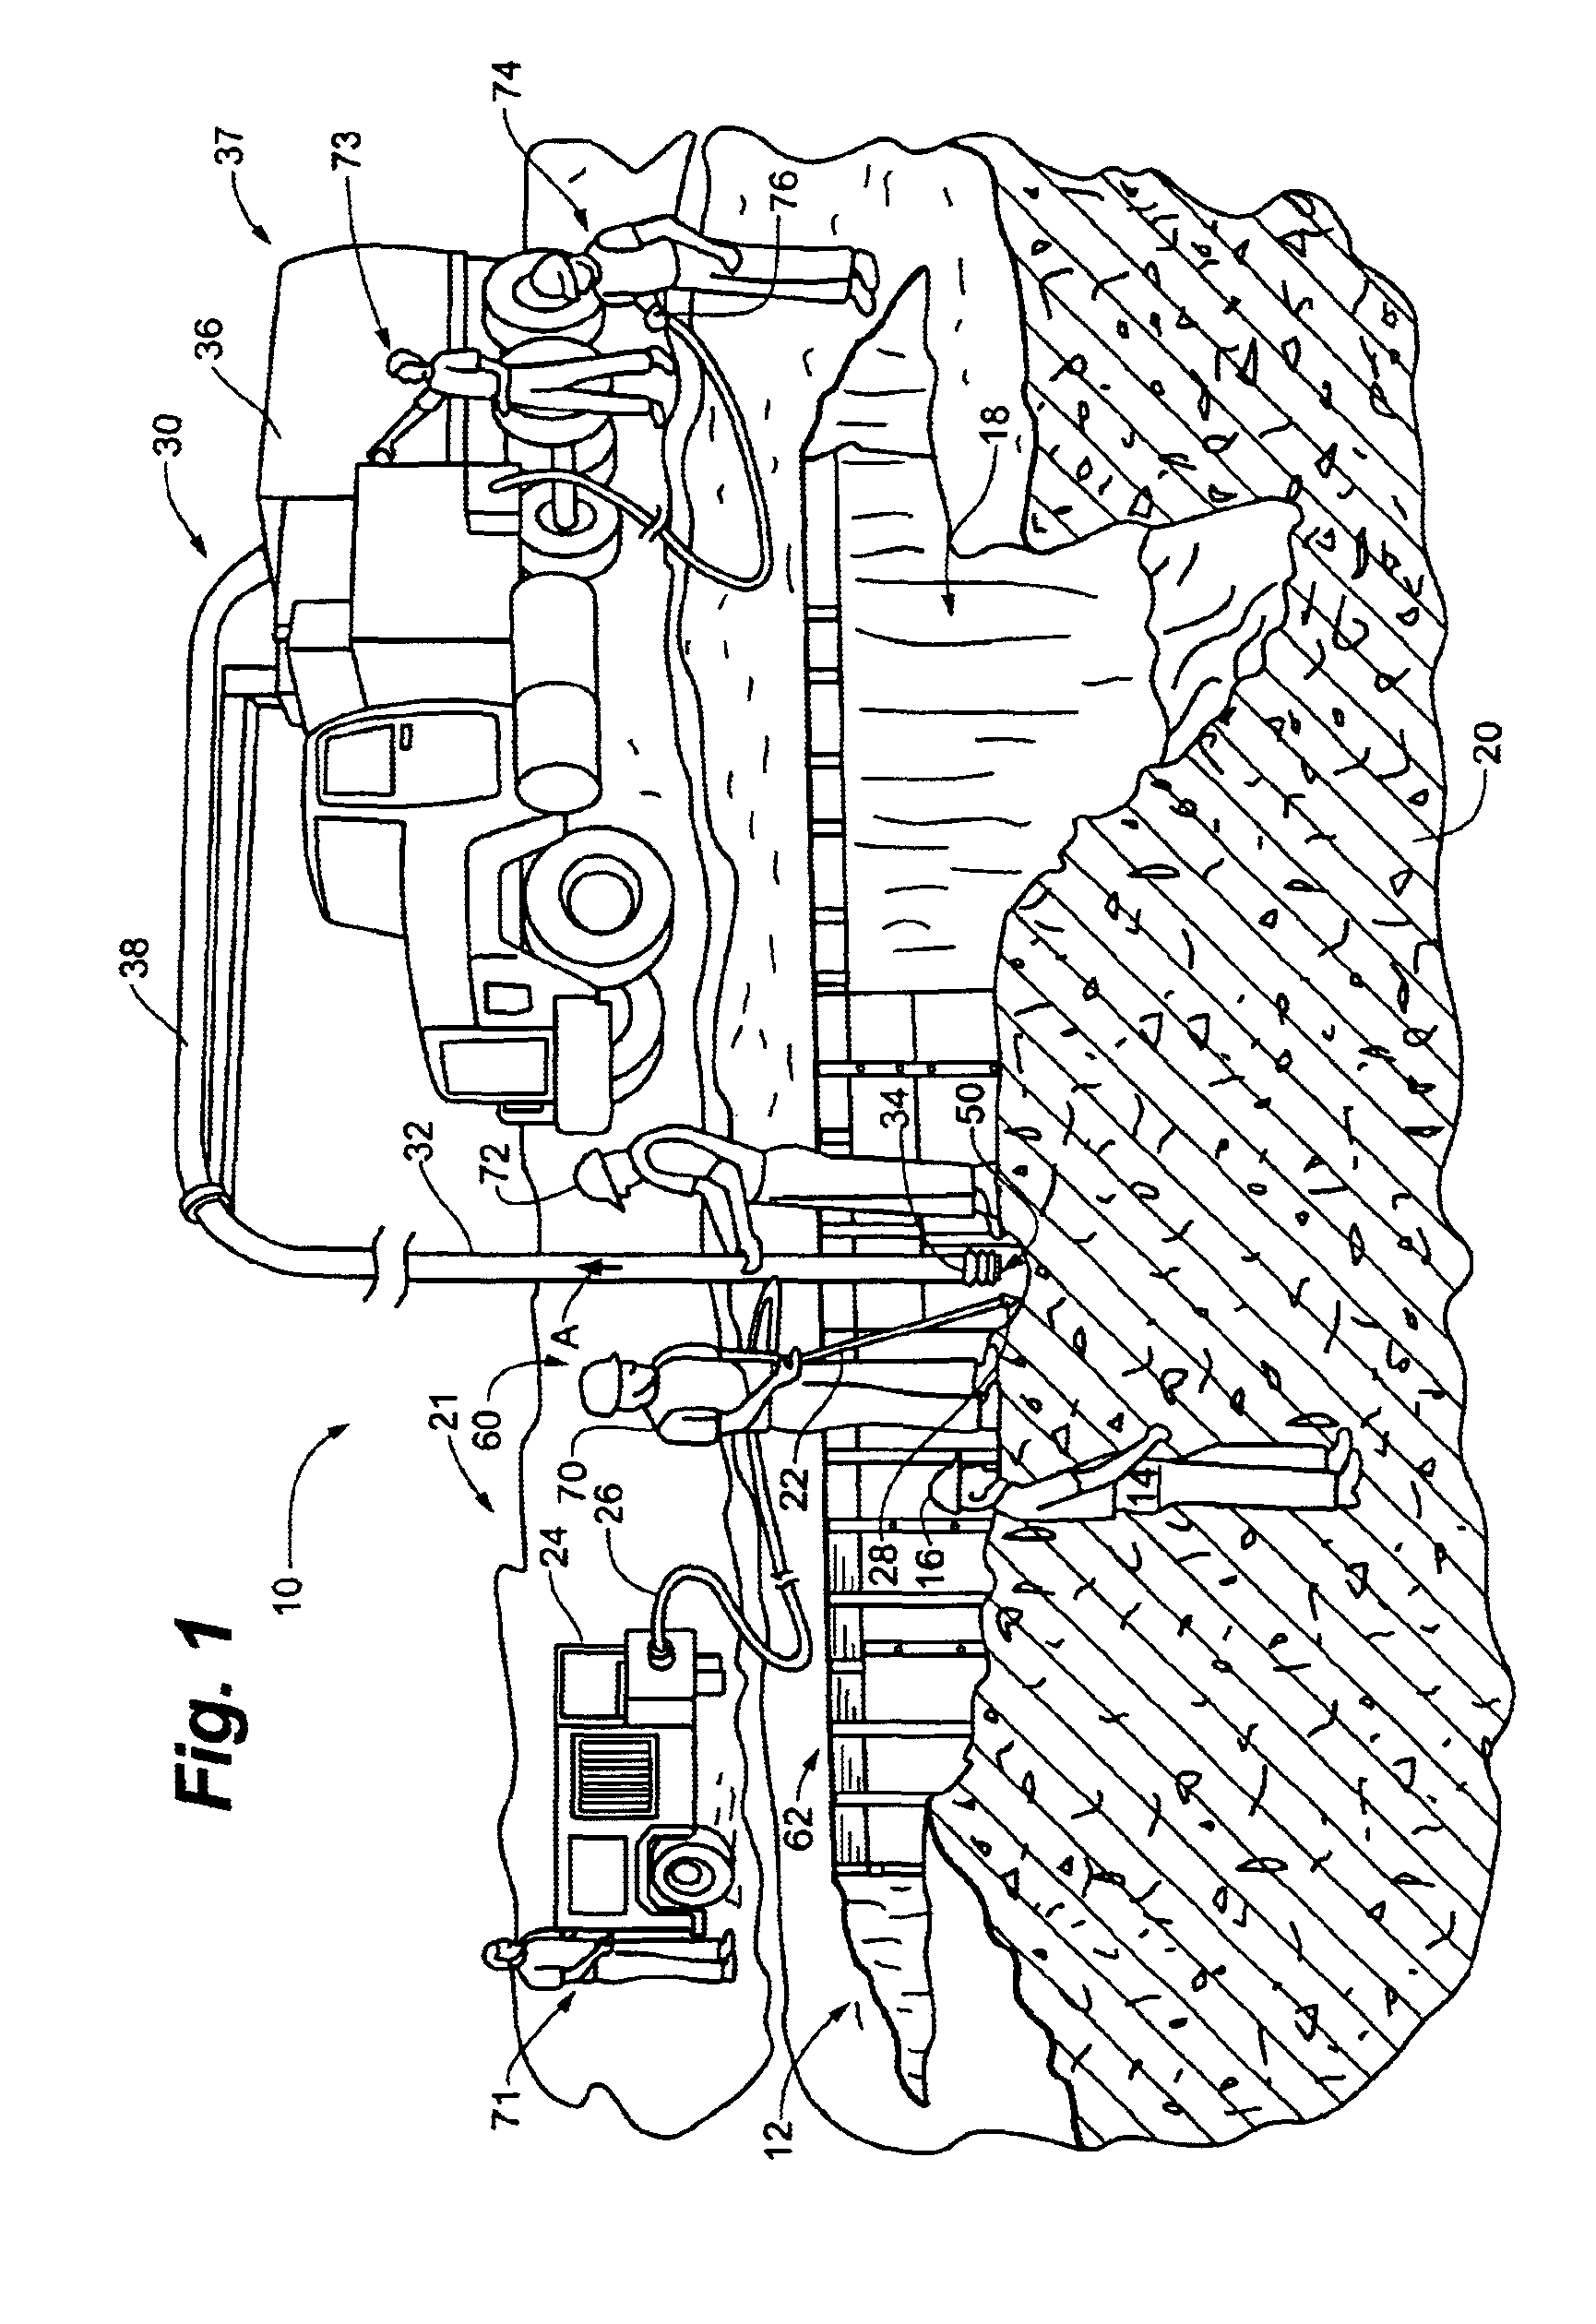 Engulfment rescue device and method